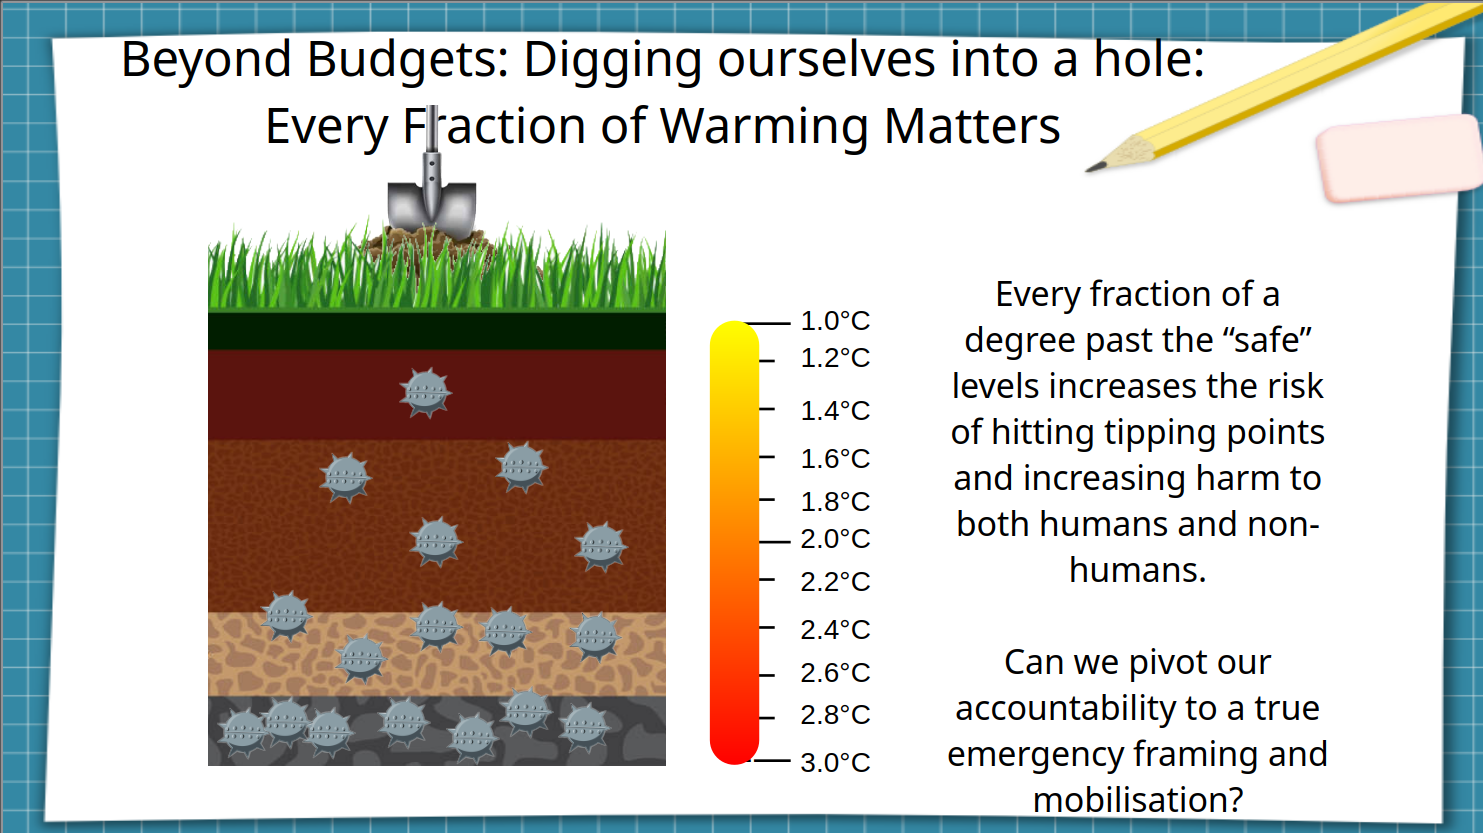 A slide about tippings showing how it's like a game of minesweeper where each layer we "dig" down (more temperature increase) the more "mines" (tipping points) we risk hitting.